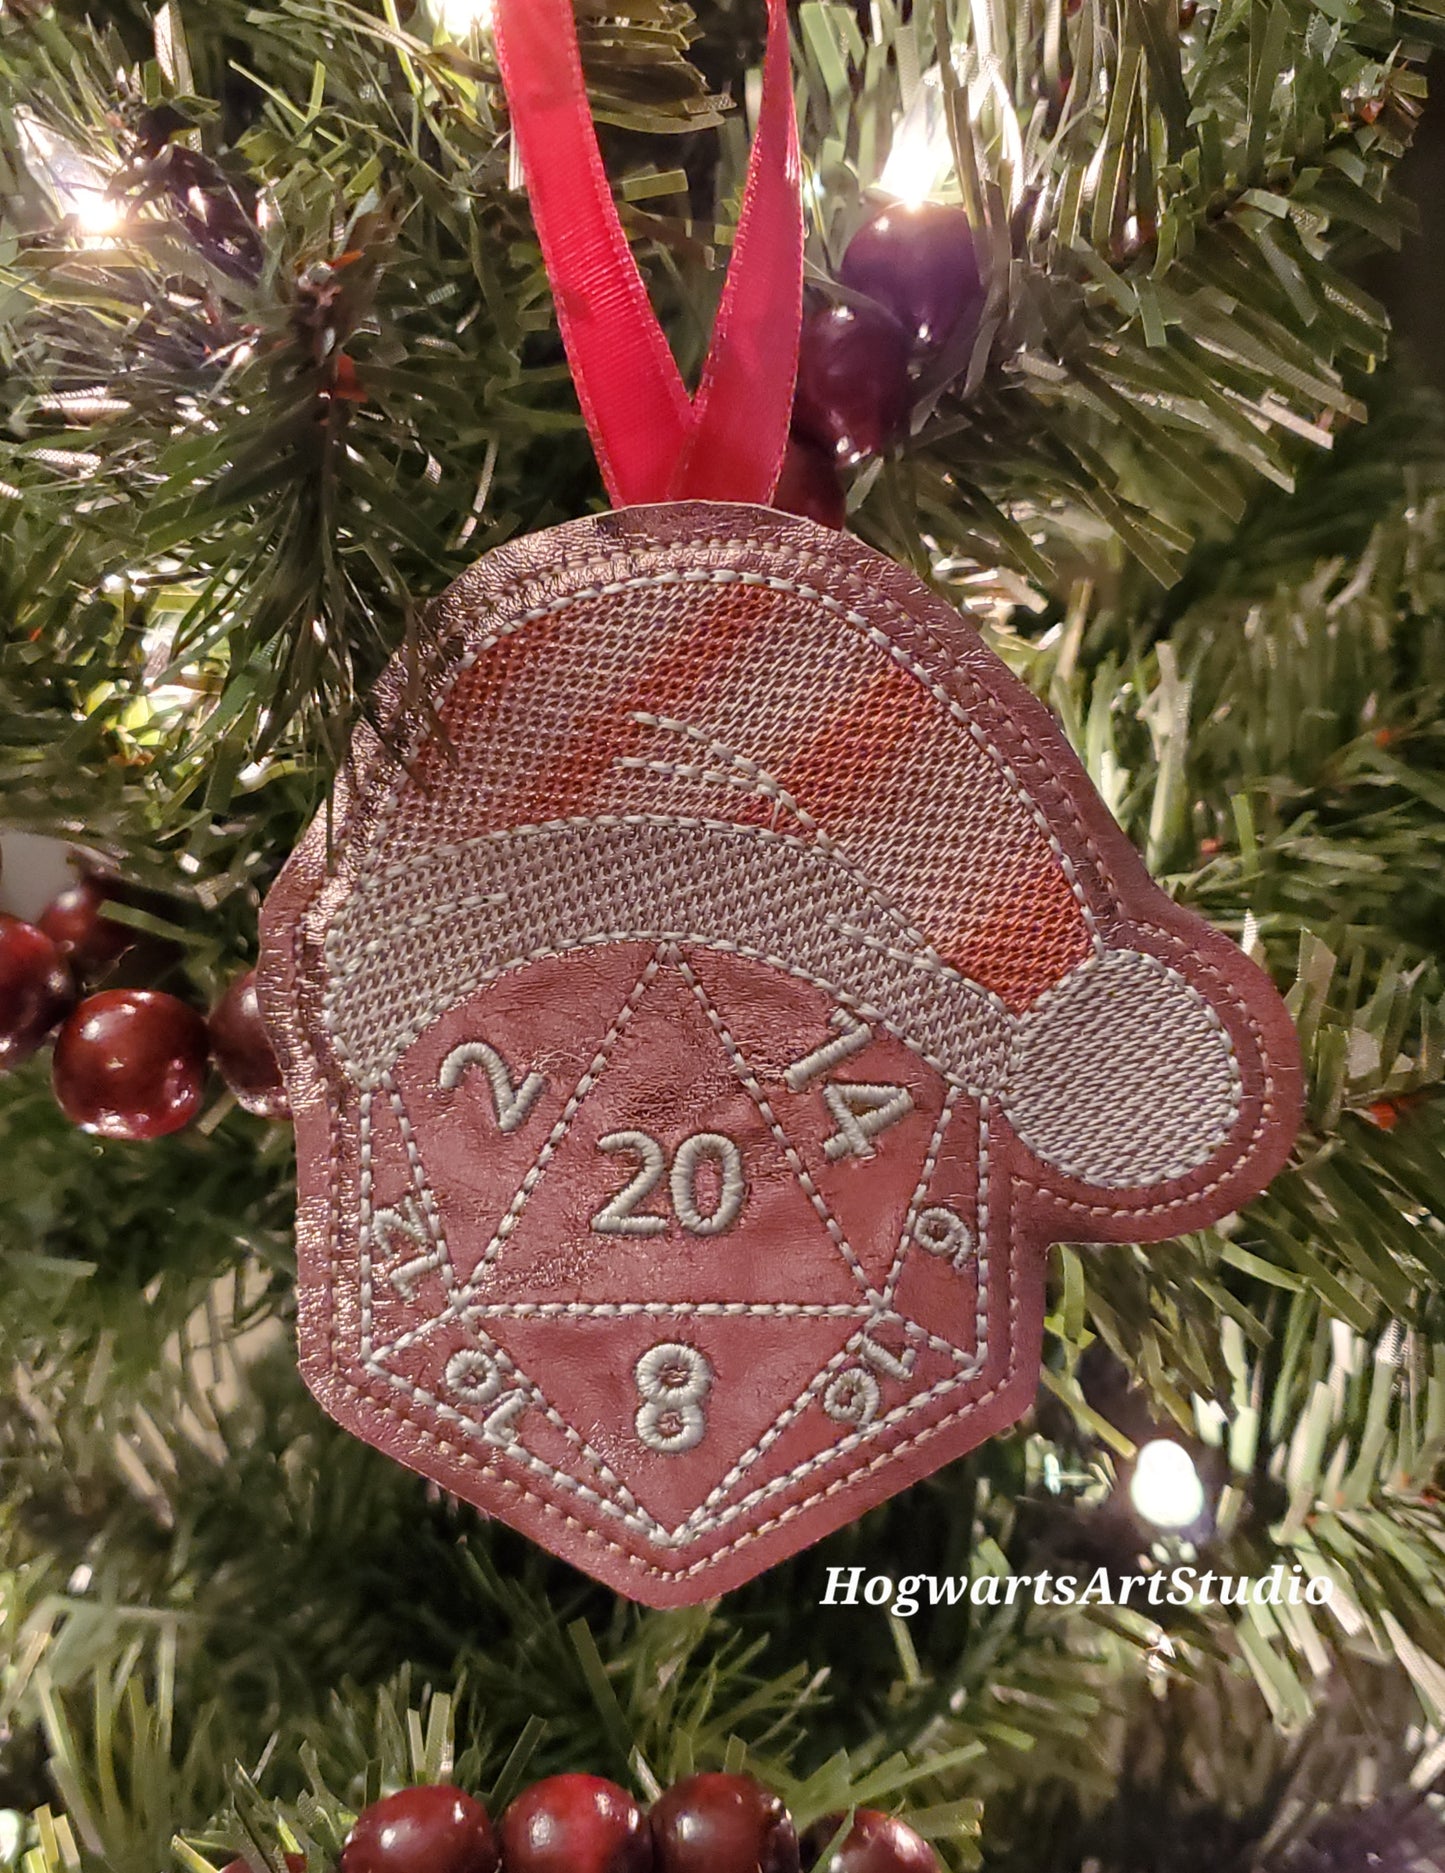 D20 Dice in a Santa Hat Ornament- ready to go on a new adventure!